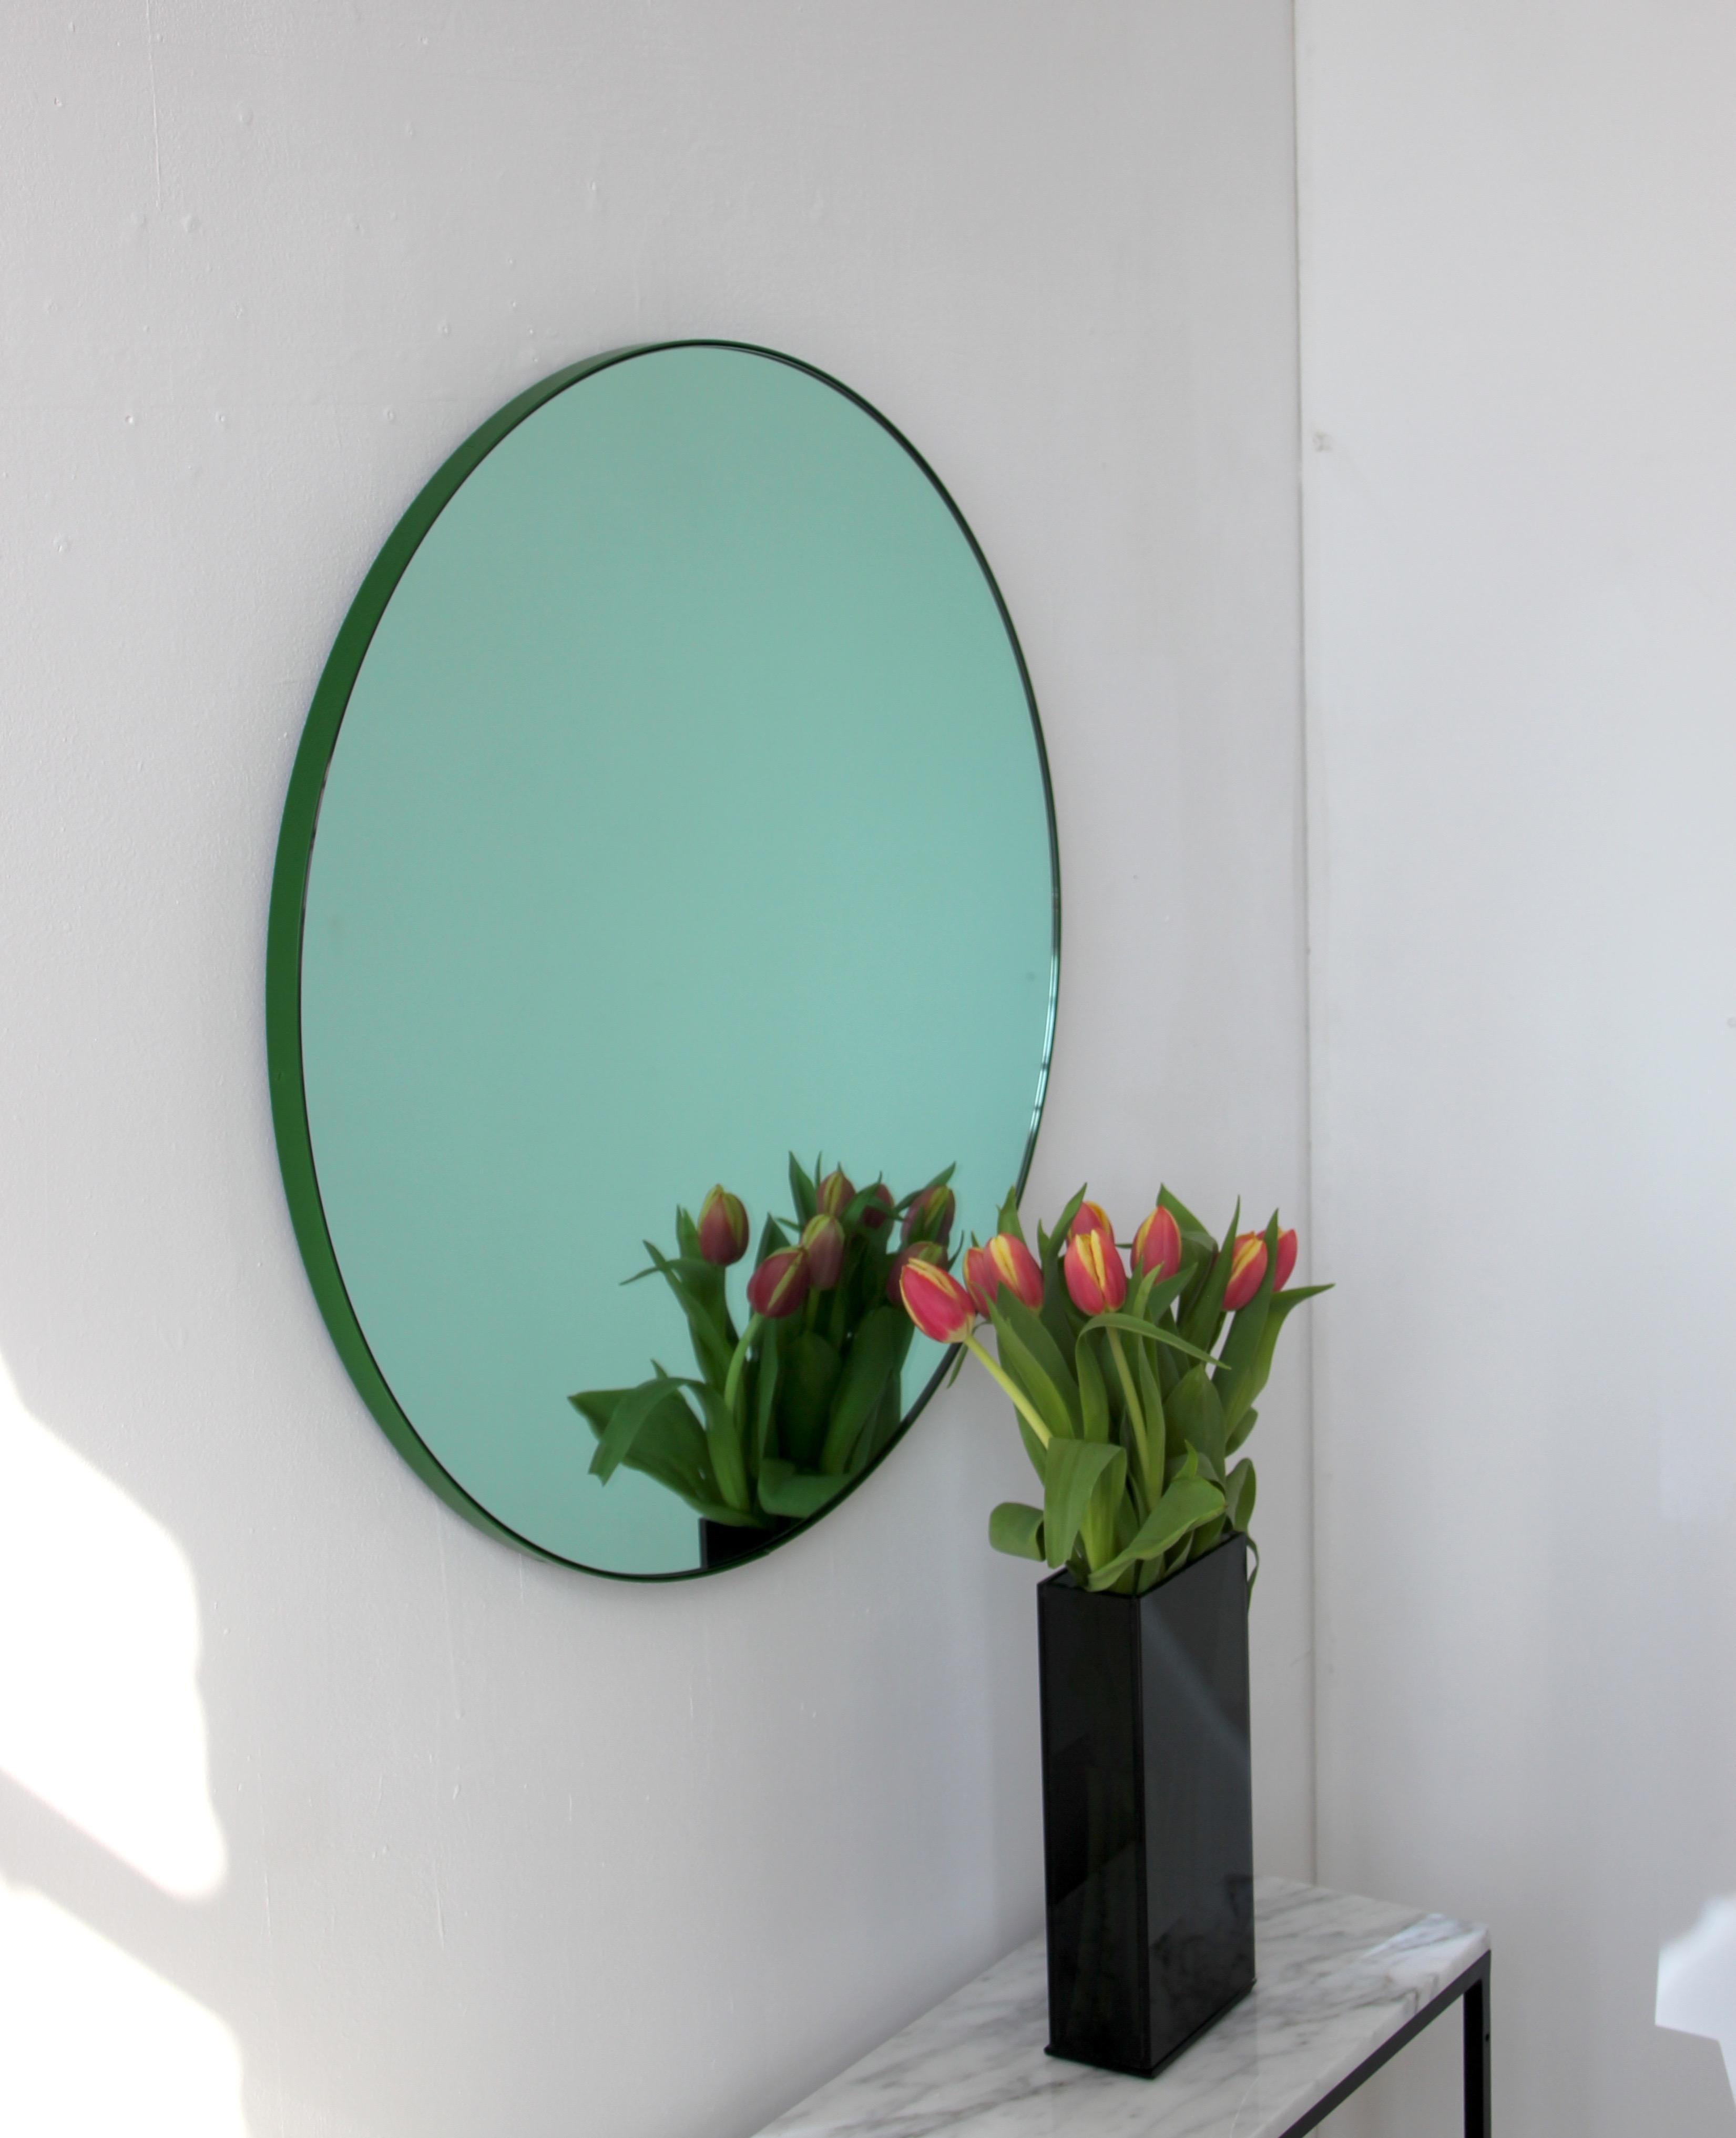 British Orbis Green Tinted Modern Round Mirror with Green Frame, Small